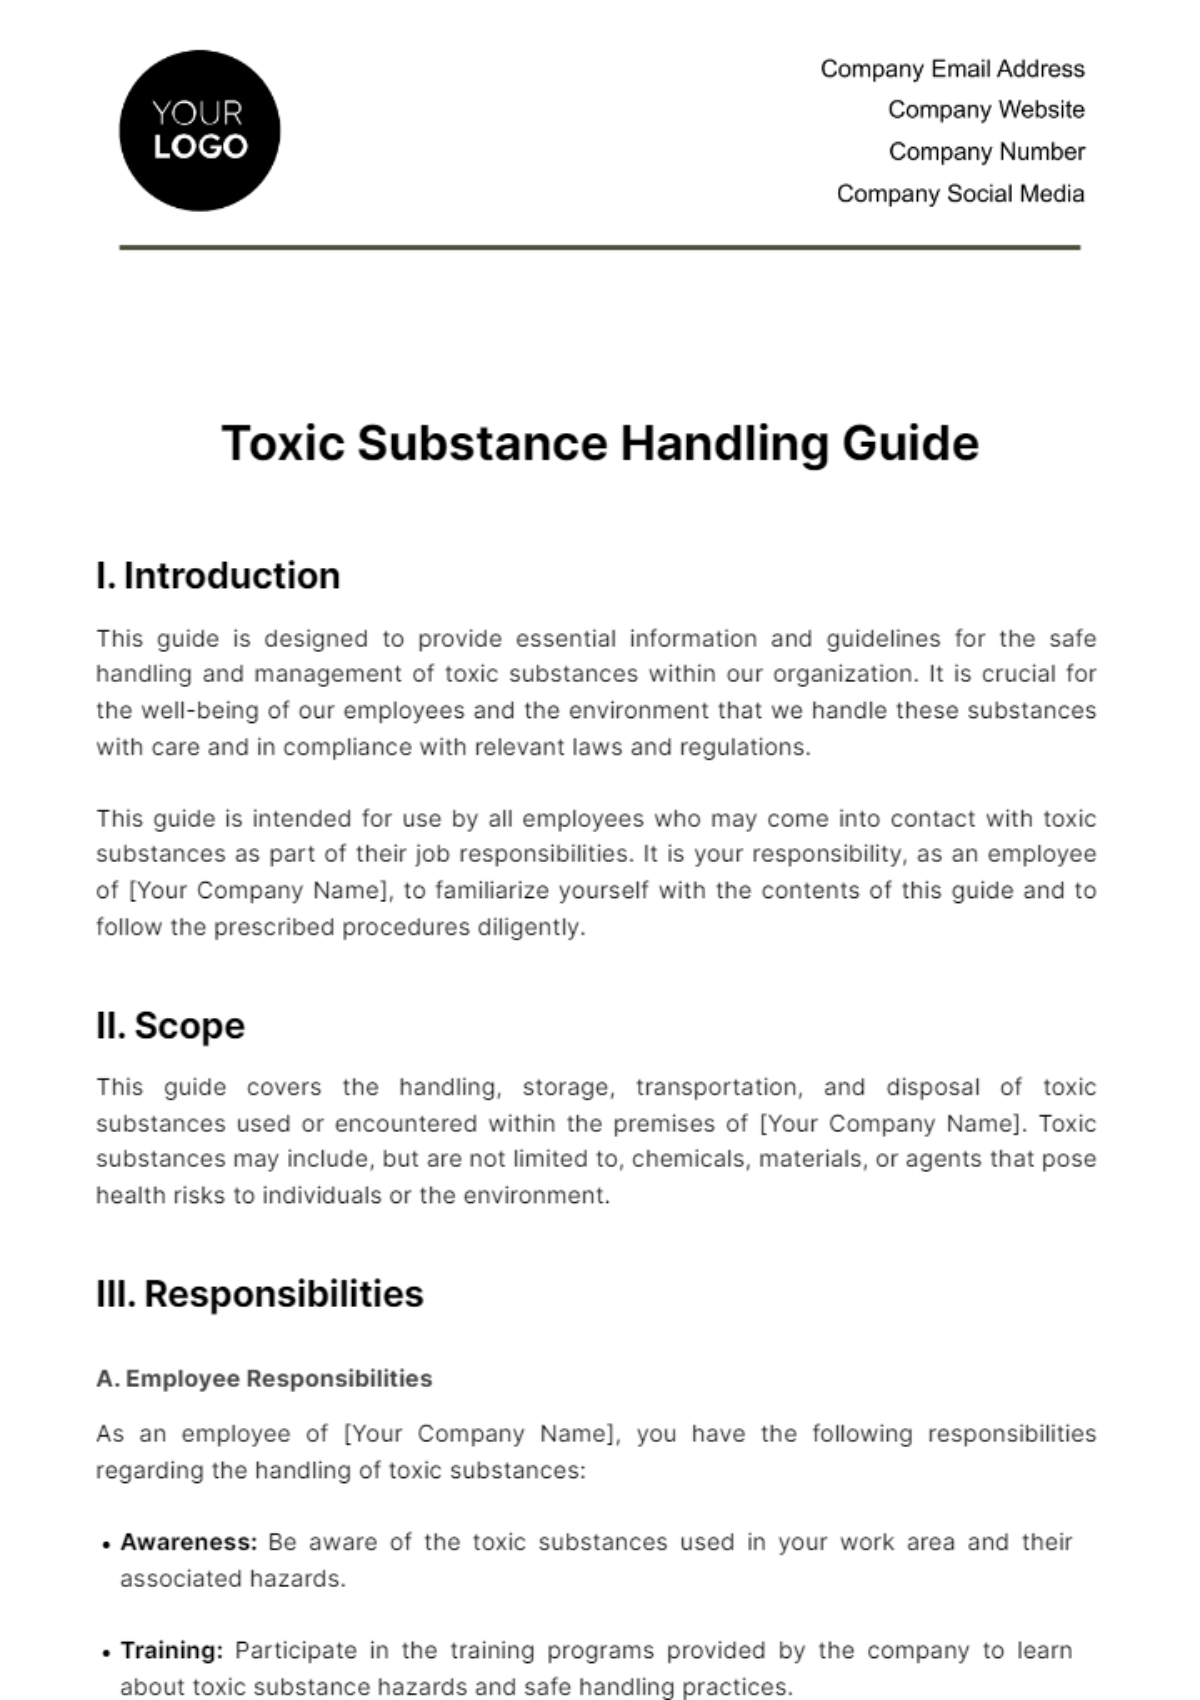 Free Toxic Substance Handling Guide HR Template